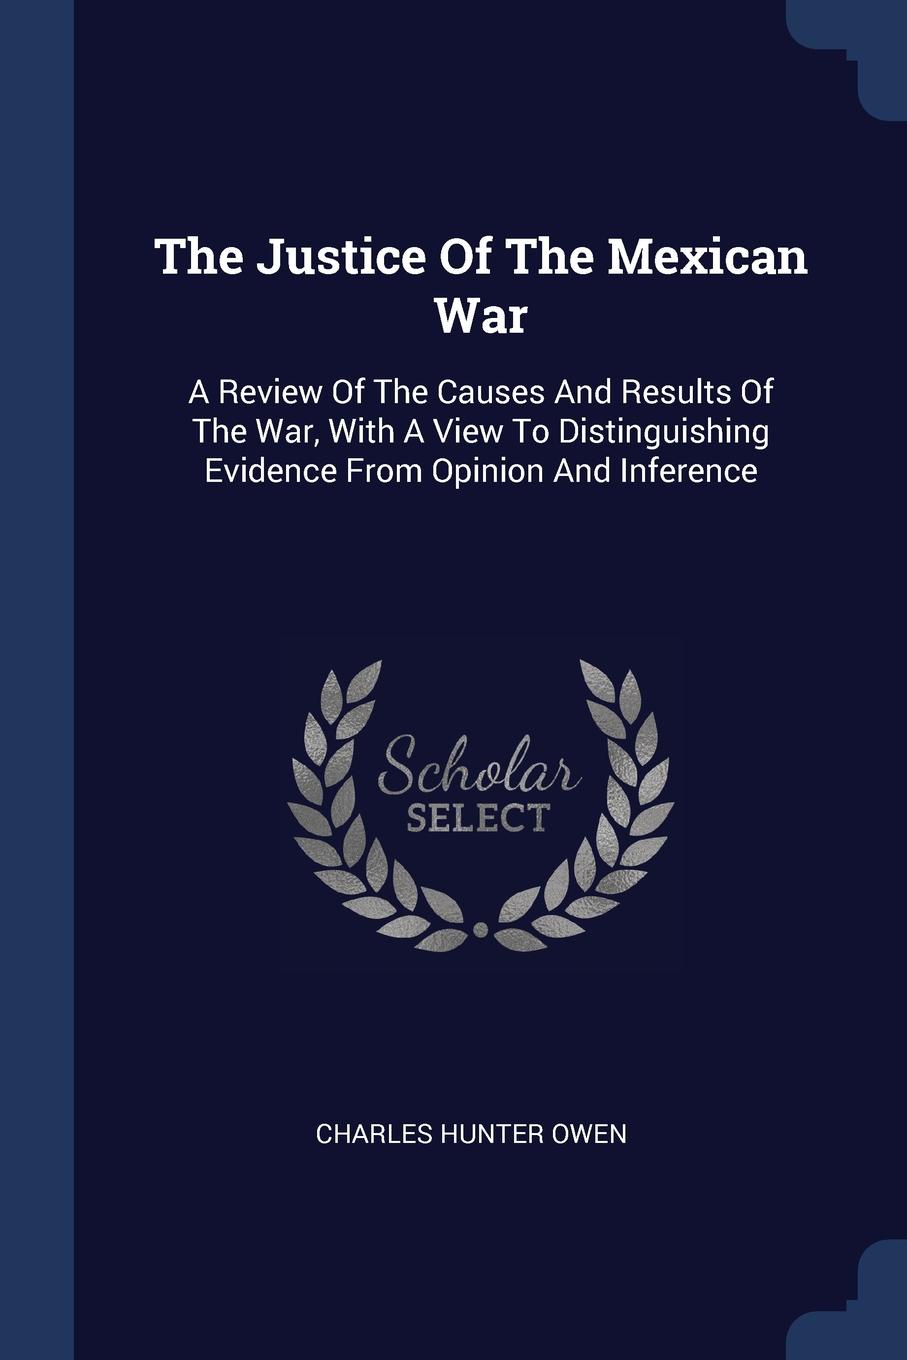 The Justice Of The Mexican War. A Review Of The Causes And Results Of The War, With A View To Distinguishing Evidence From Opinion And Inference